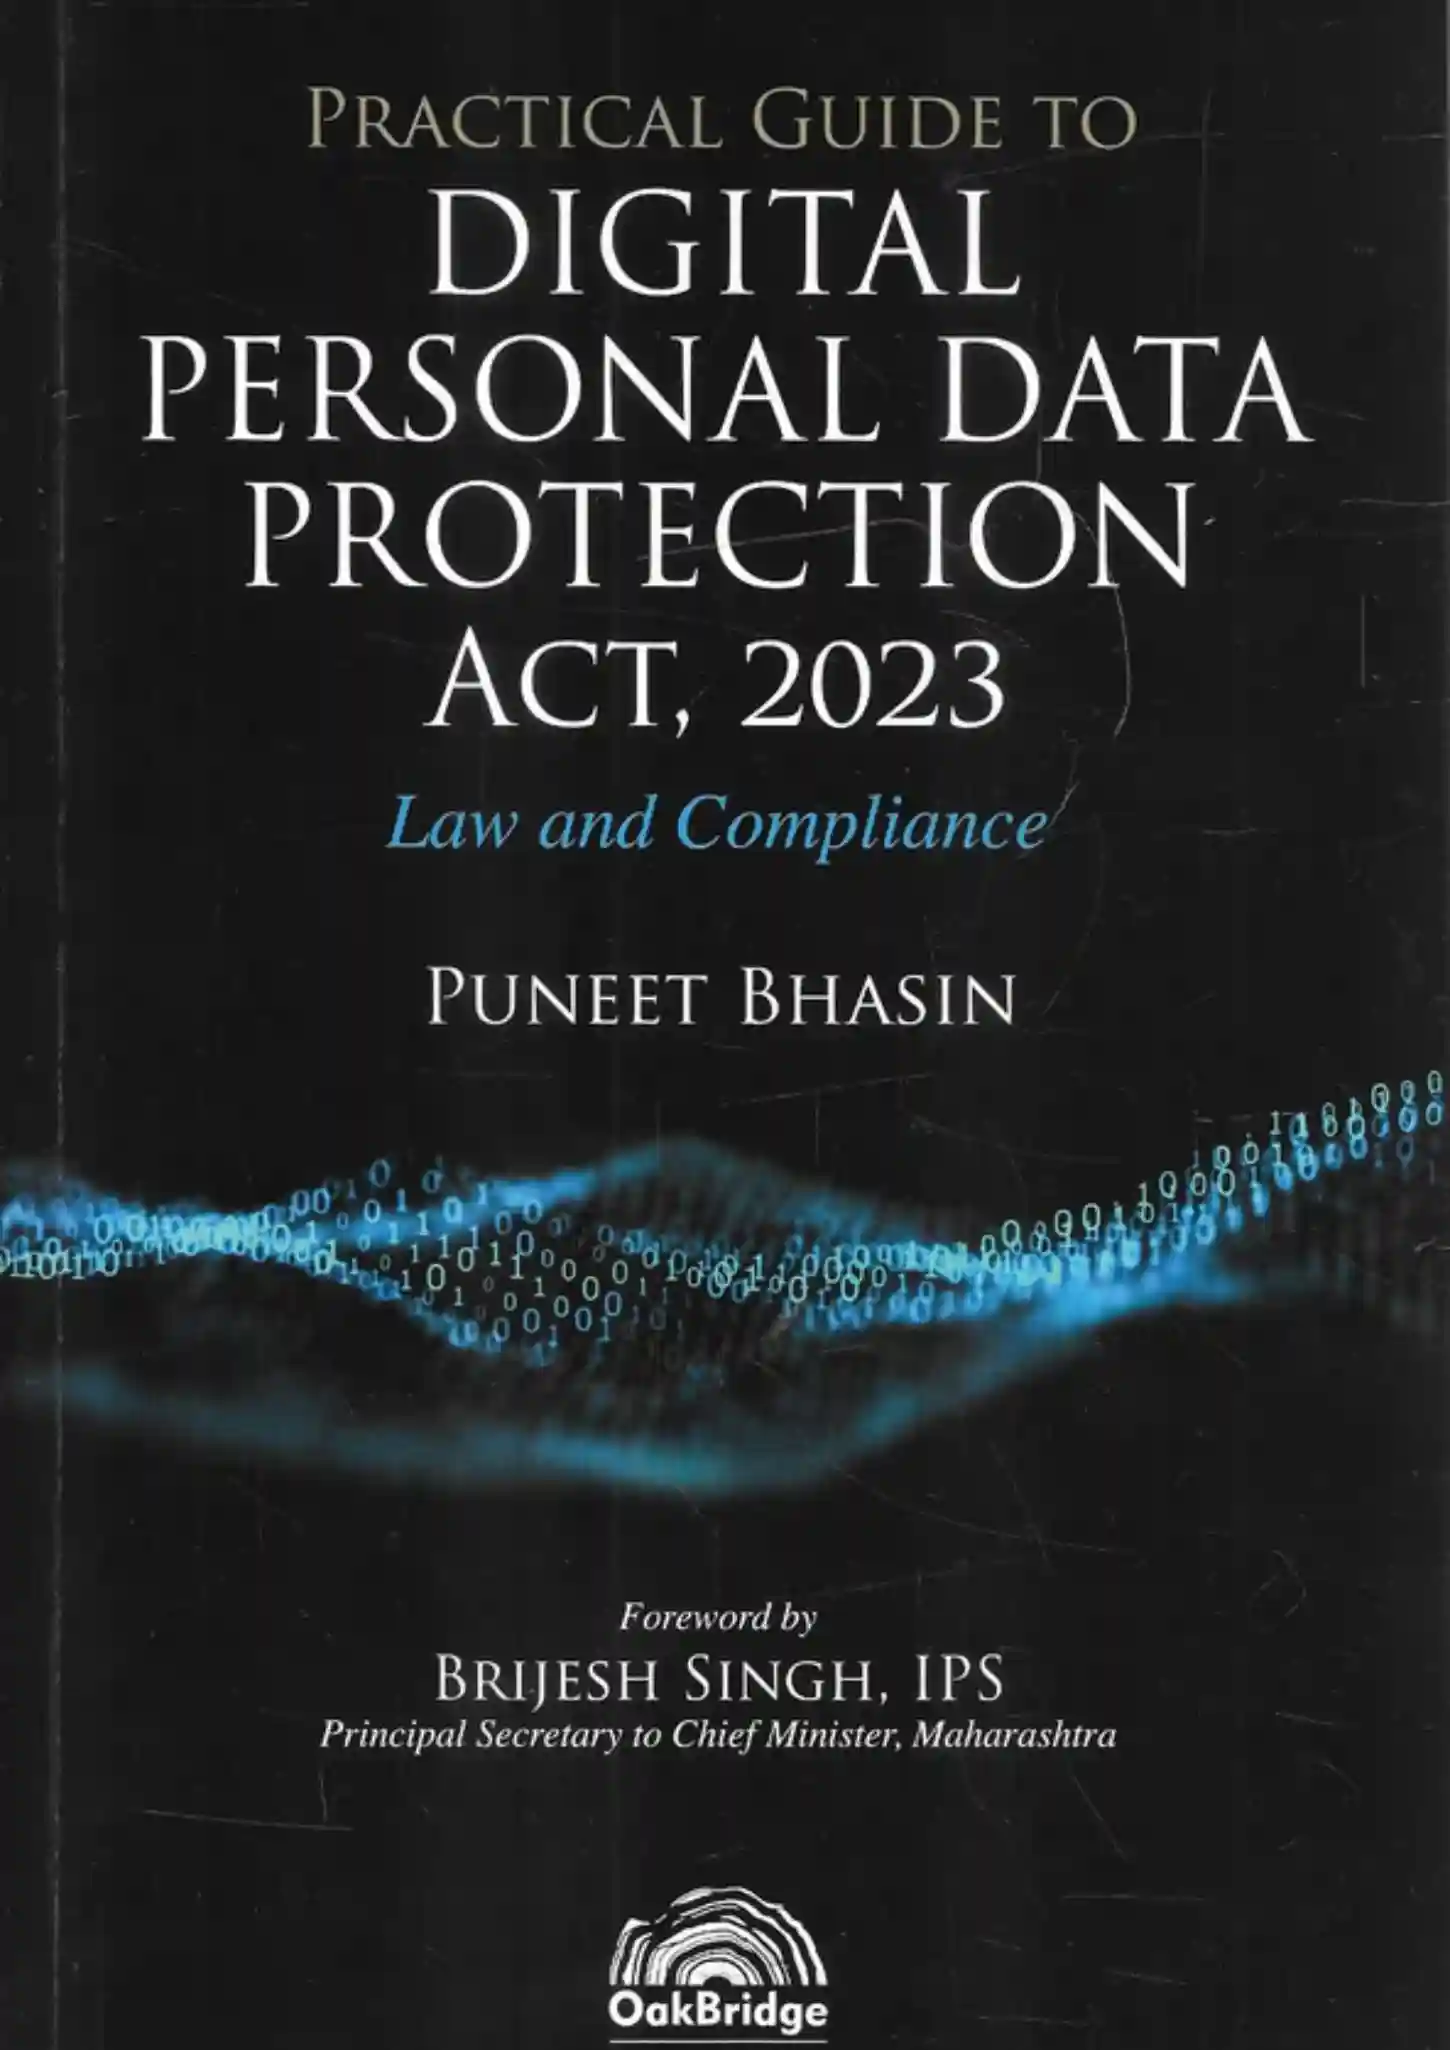 Practical Guide to Digital Personal Data Protection Act, 2023 - Law and Compliance